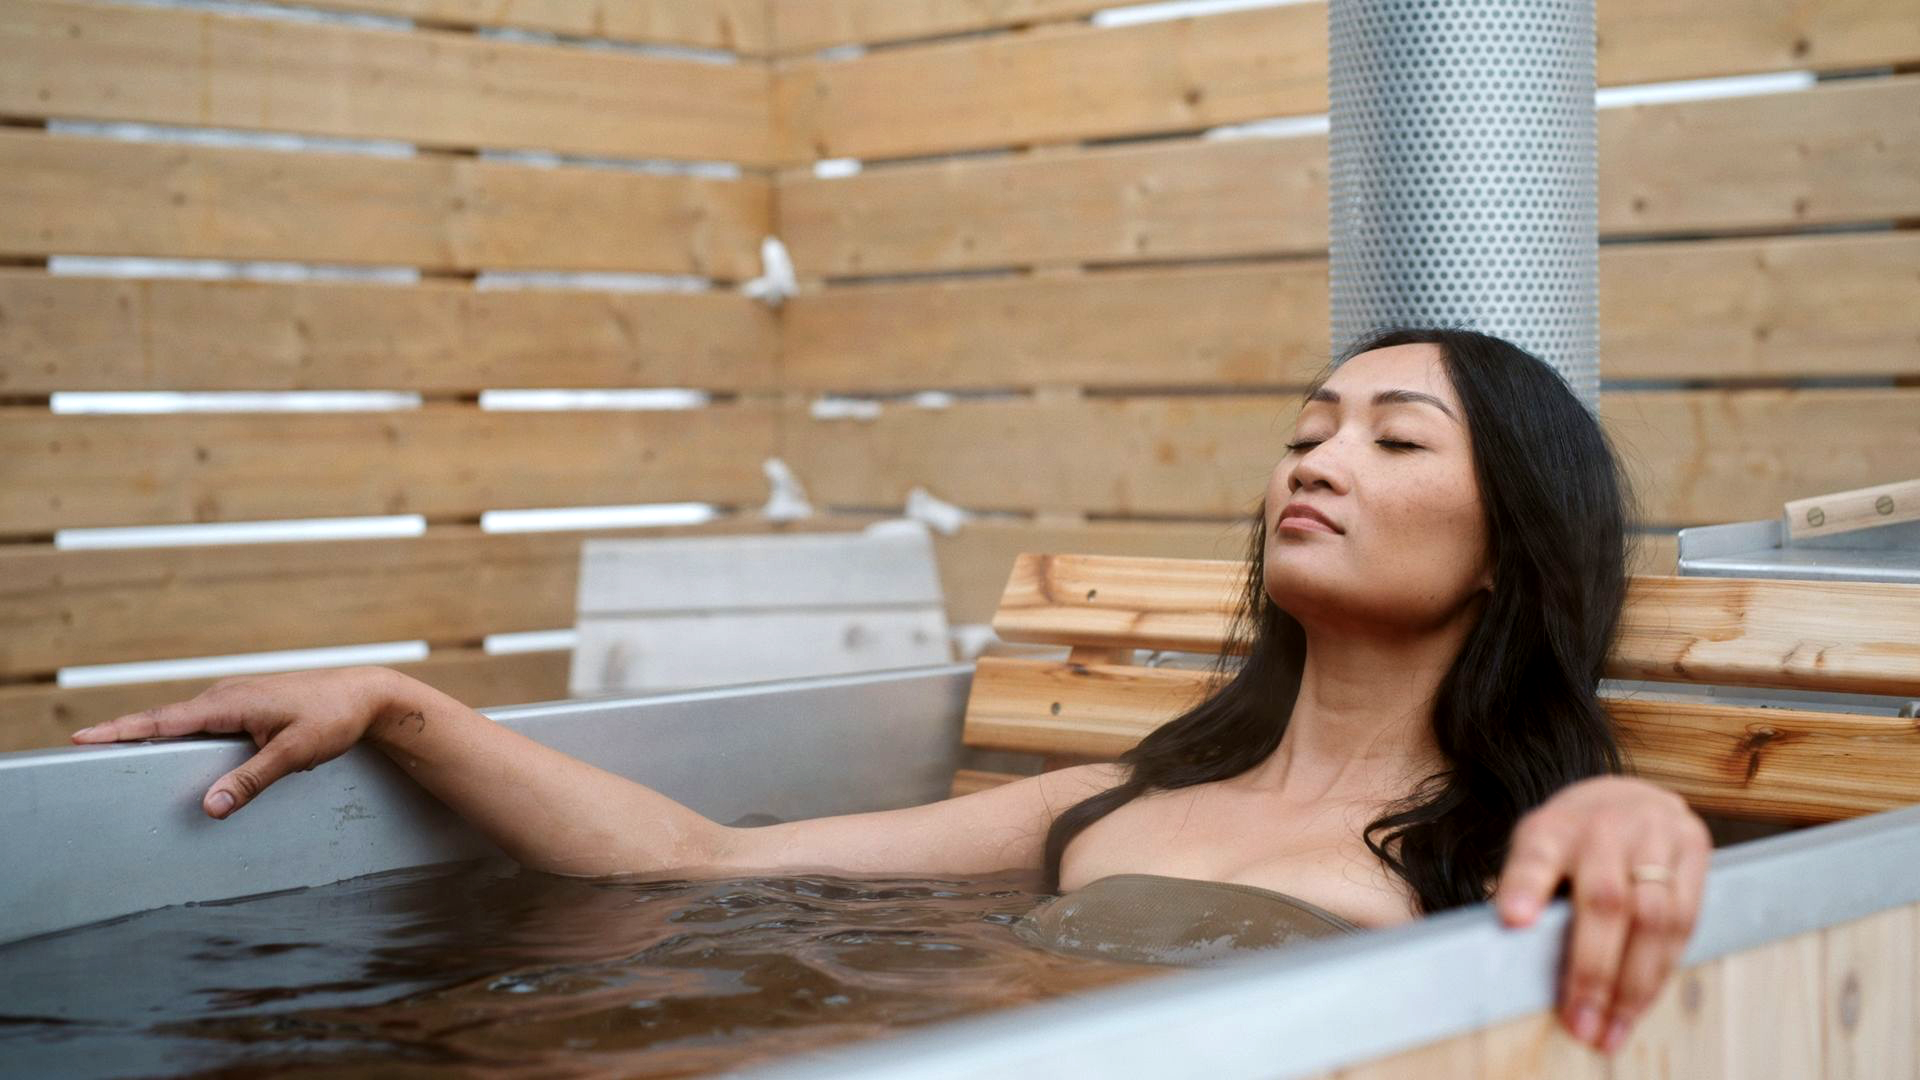 thumbnail for tourism and travel videos, showing an asian woman relaxing in a hot tub at a stylish resort